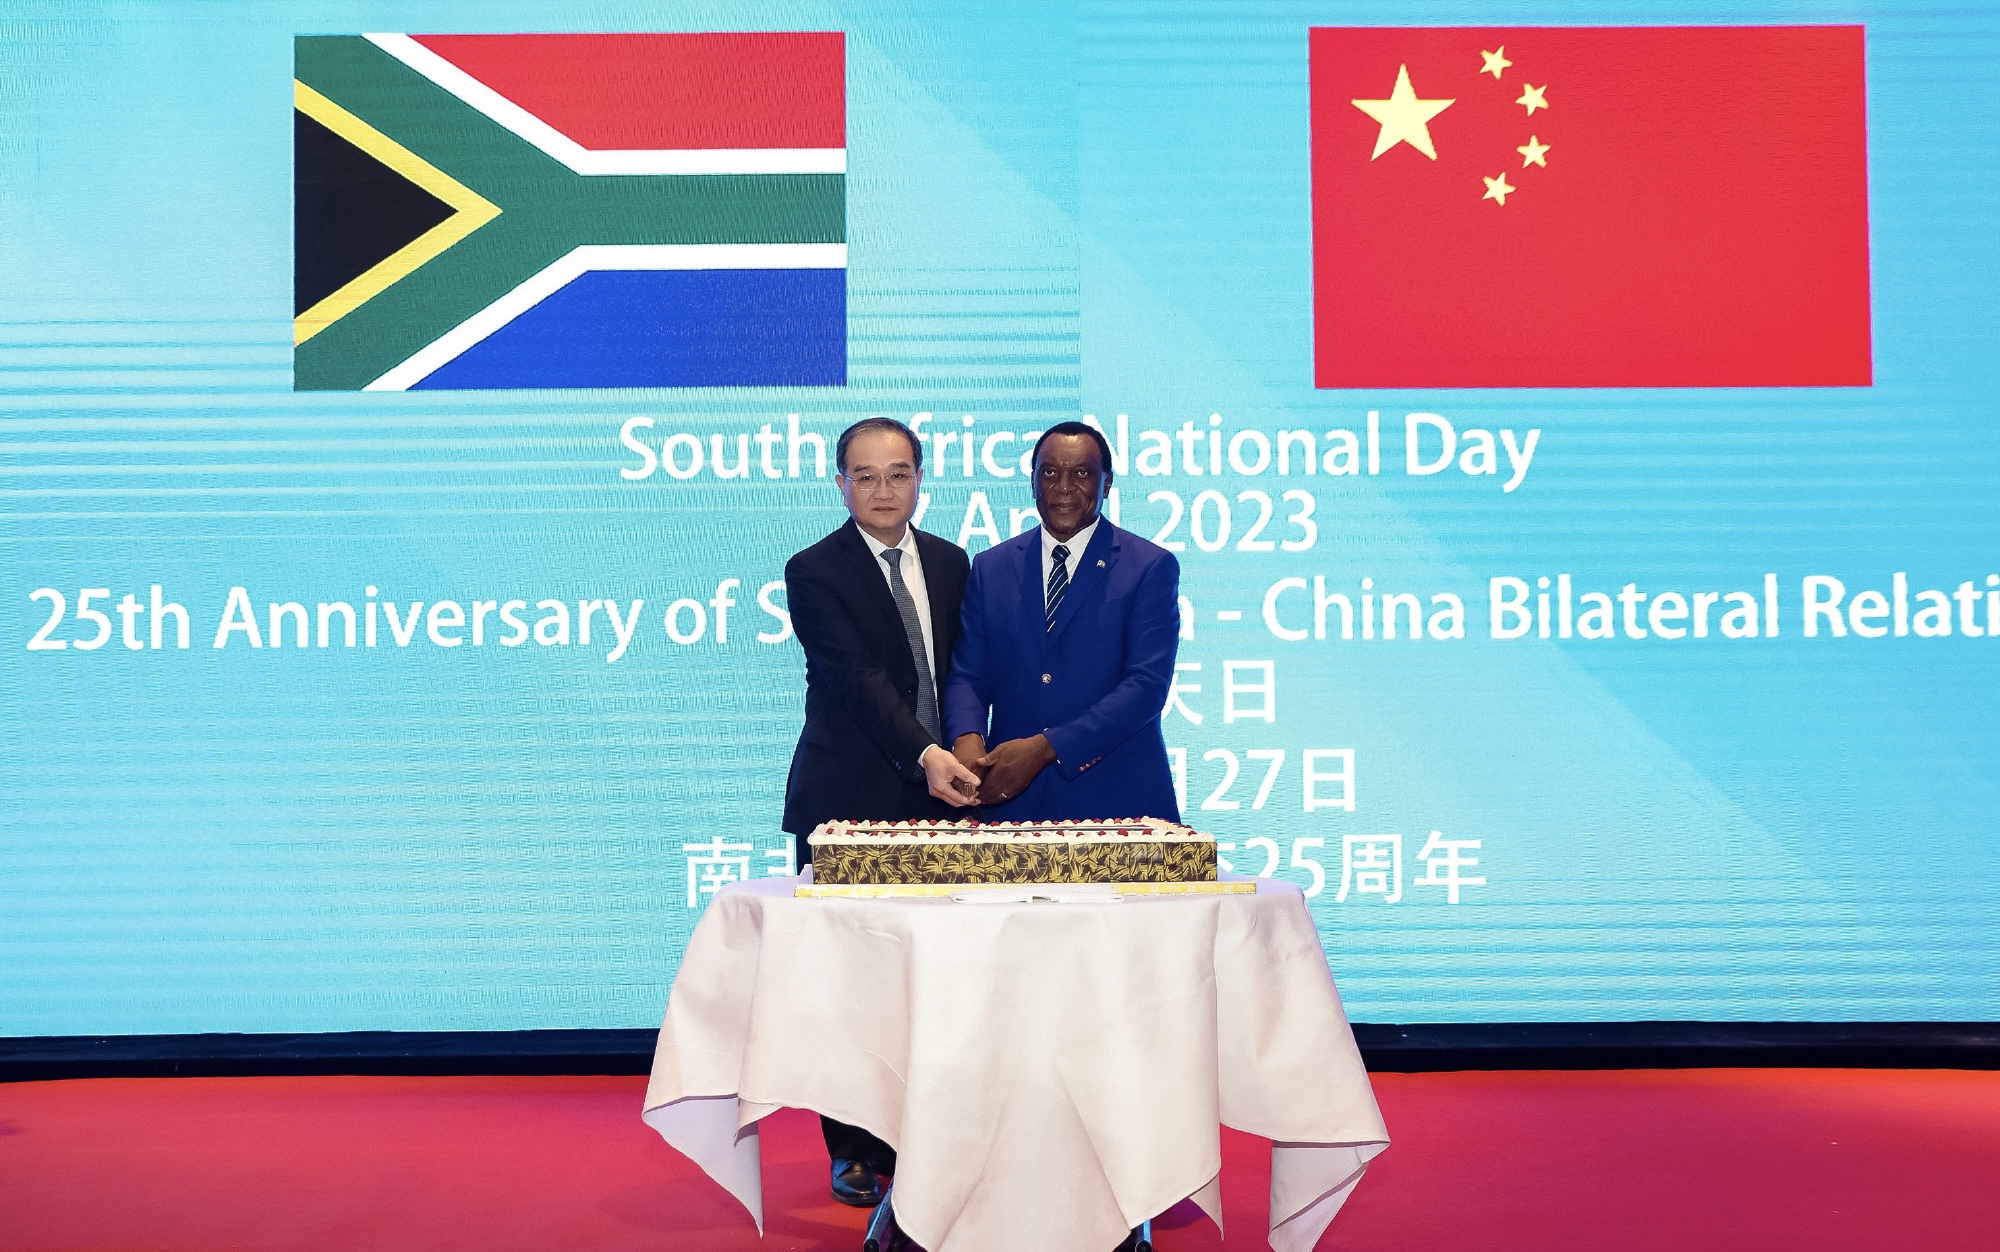 Deng Li (left), Vice Minister of China's Ministry of Foreign Affairs with Siyabonga Cwele, South African Ambassador to China Photo: Courtesy of the South African Embassy in China